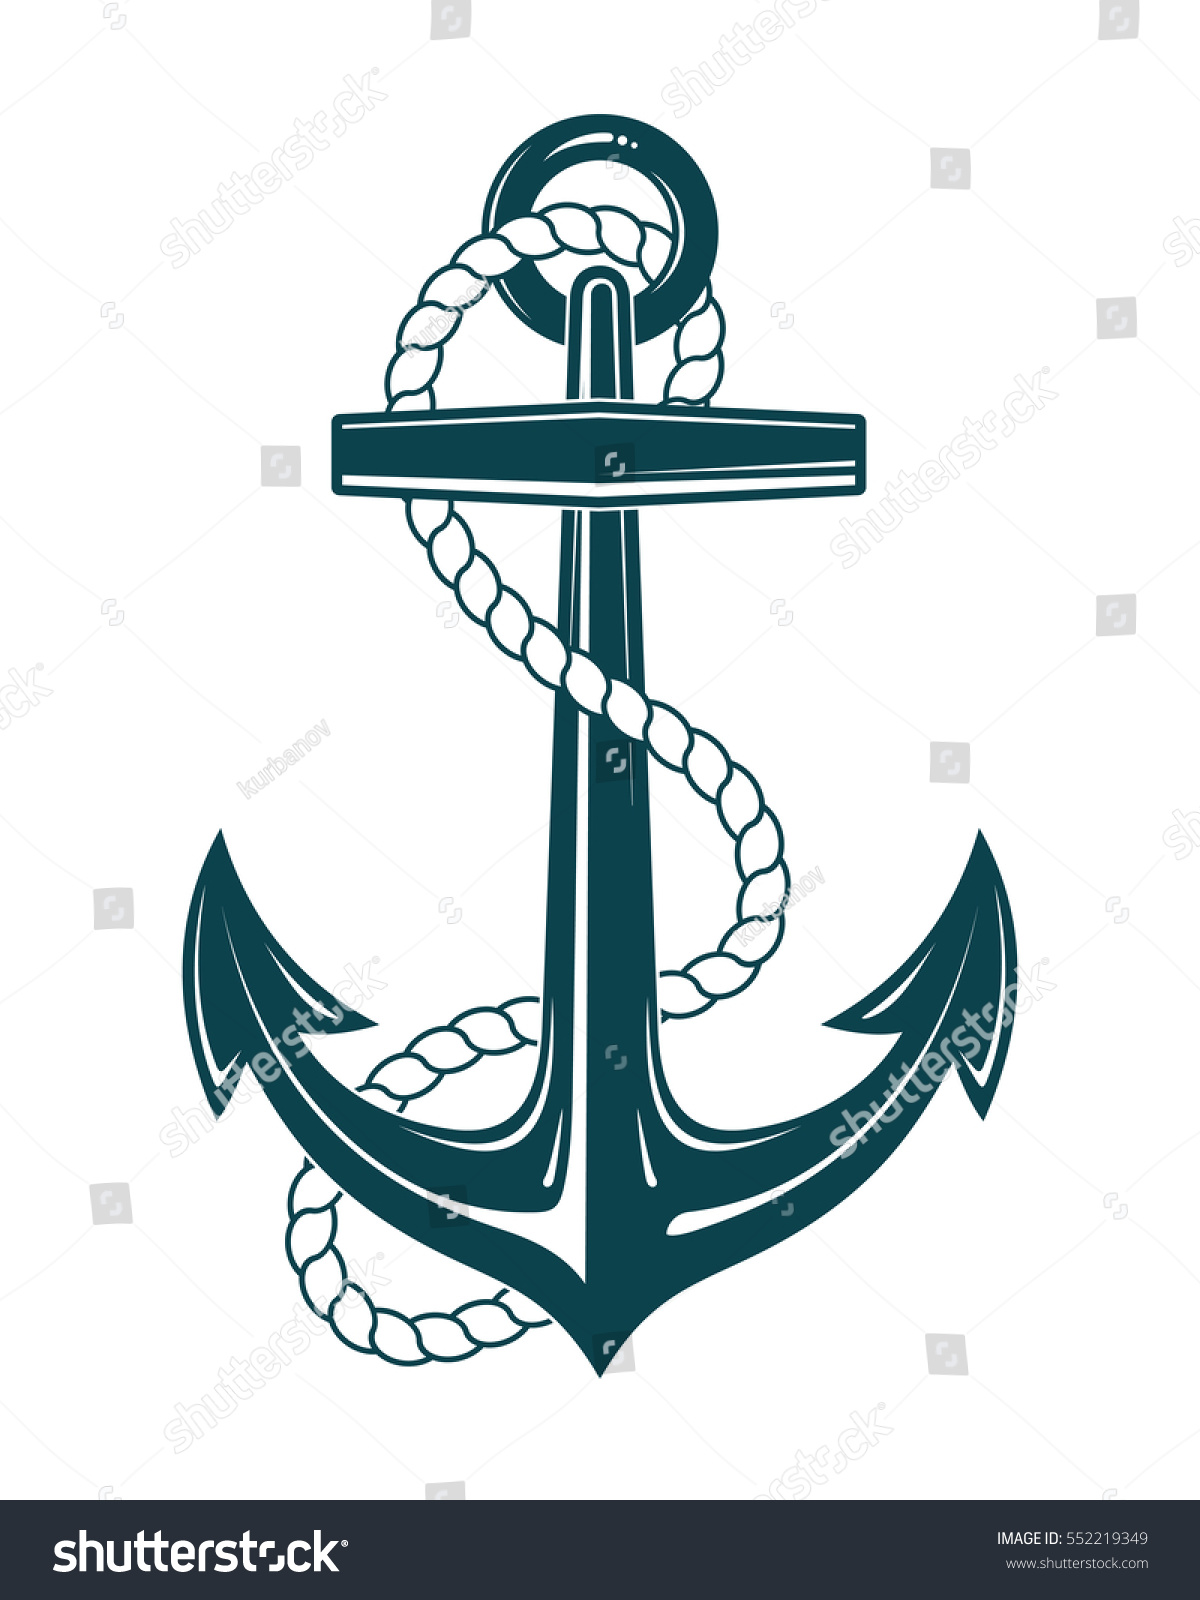 SVG of Nautical Anchor with rope. Vector illustration isolated svg